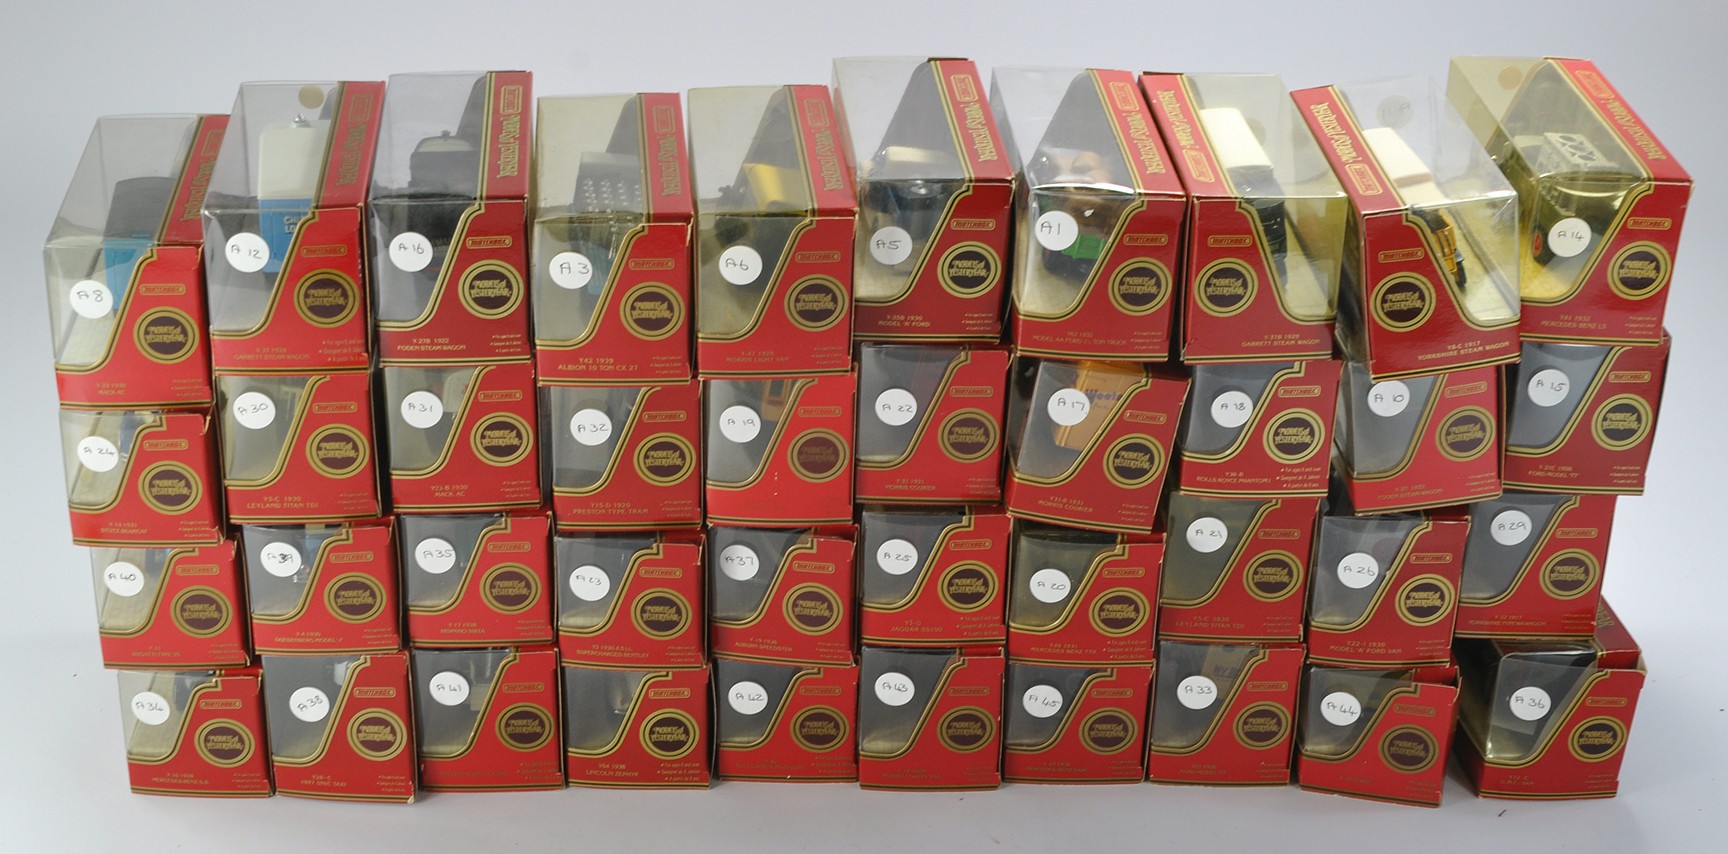 A group of 40 Matchbox Models of Yesteryear promotional diecast issues in various liveries as